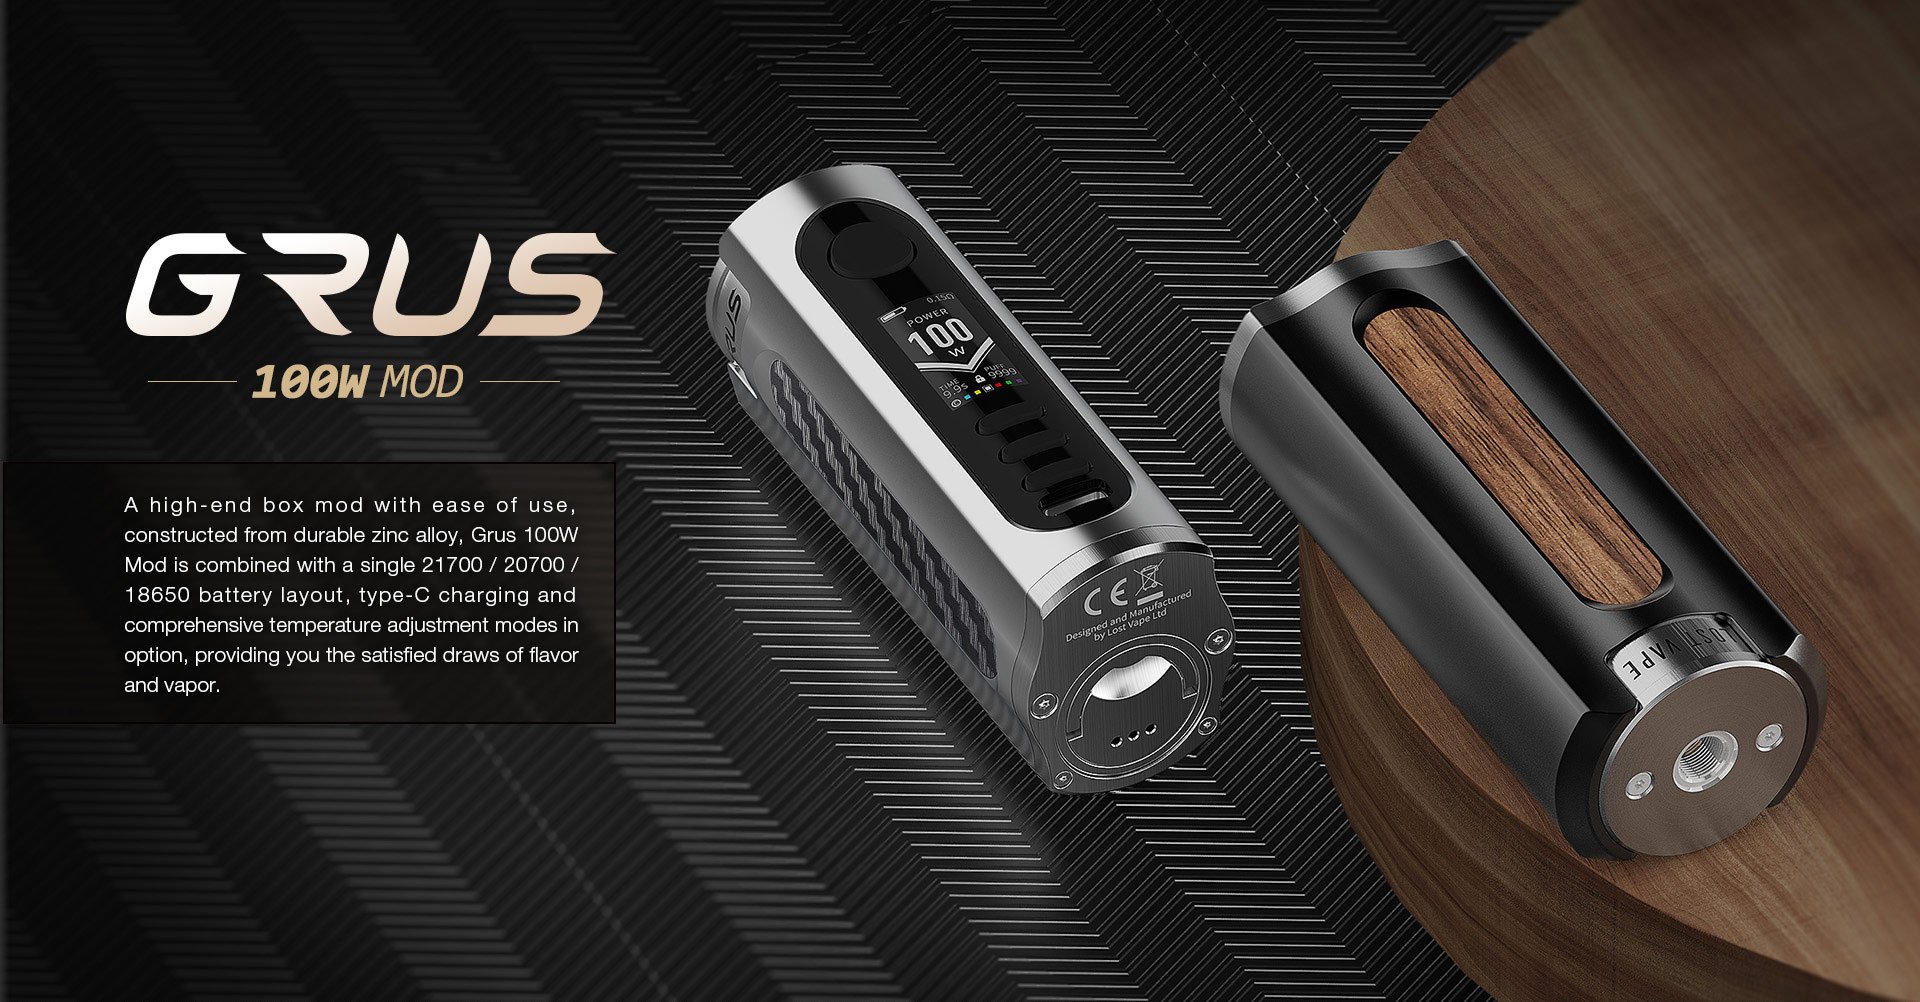 Two Grus mods on a black background, one in Sterling Silver showcasing the OLED display screen and the other in Black and Walnut Wood showing off the aesthetic. Text reads "A high-end box mod with ease of us, constructed from durable zinc-alloy, Grus 100W Mod is combined with a single 21700/20700/18650 battery layout, type-C charging and comprehensive temperature adjustment modes in option, providing you the satisfied draws of flavor and vapor"